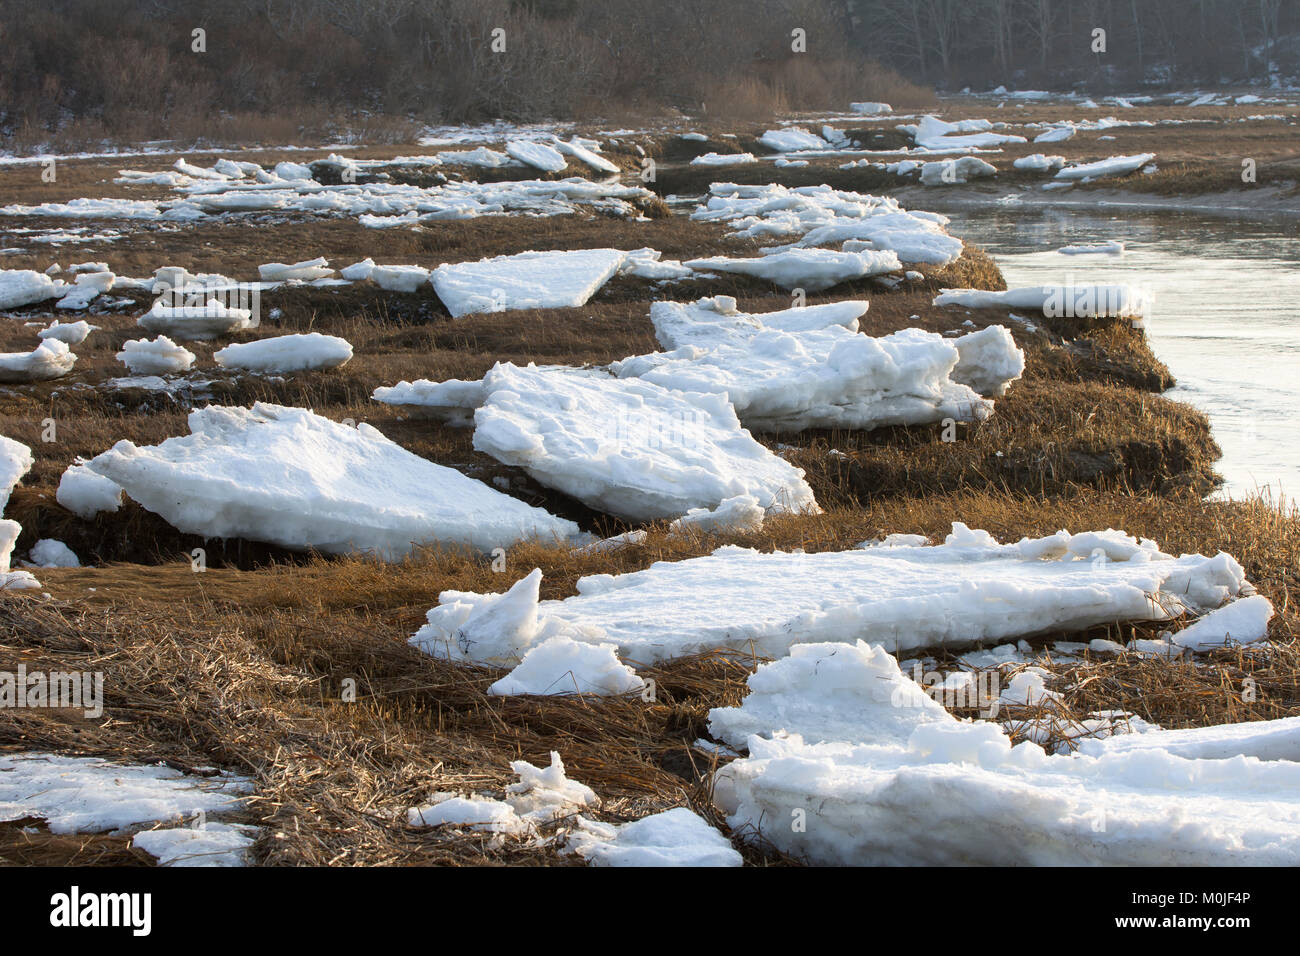 Ice along the shore of Paine's Creek, Brewster, Massachustts, Cape Cod, USA on a winter's day. Stock Photo